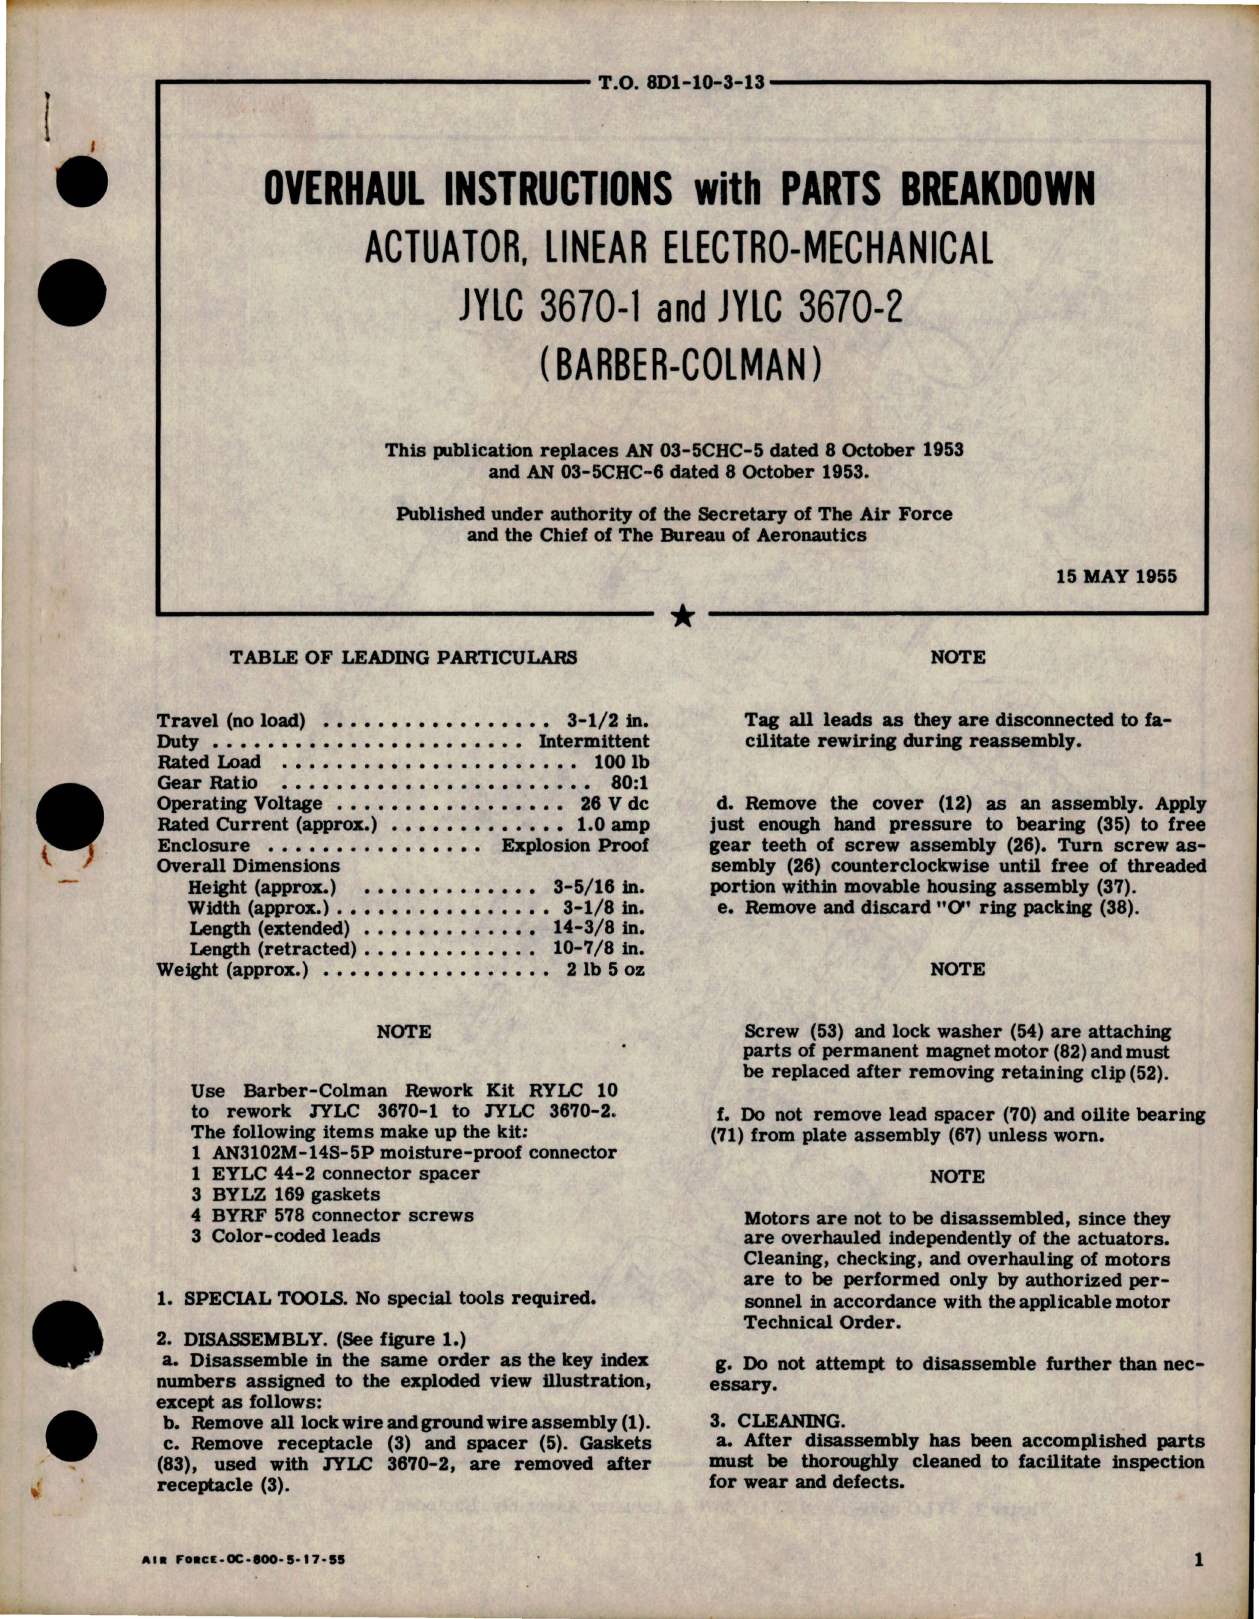 Sample page 1 from AirCorps Library document: Overhaul Instructions with Parts for Linear Electro Mechanical Actuator - Parts JYLC 3670-1 and JYLC 3670-2